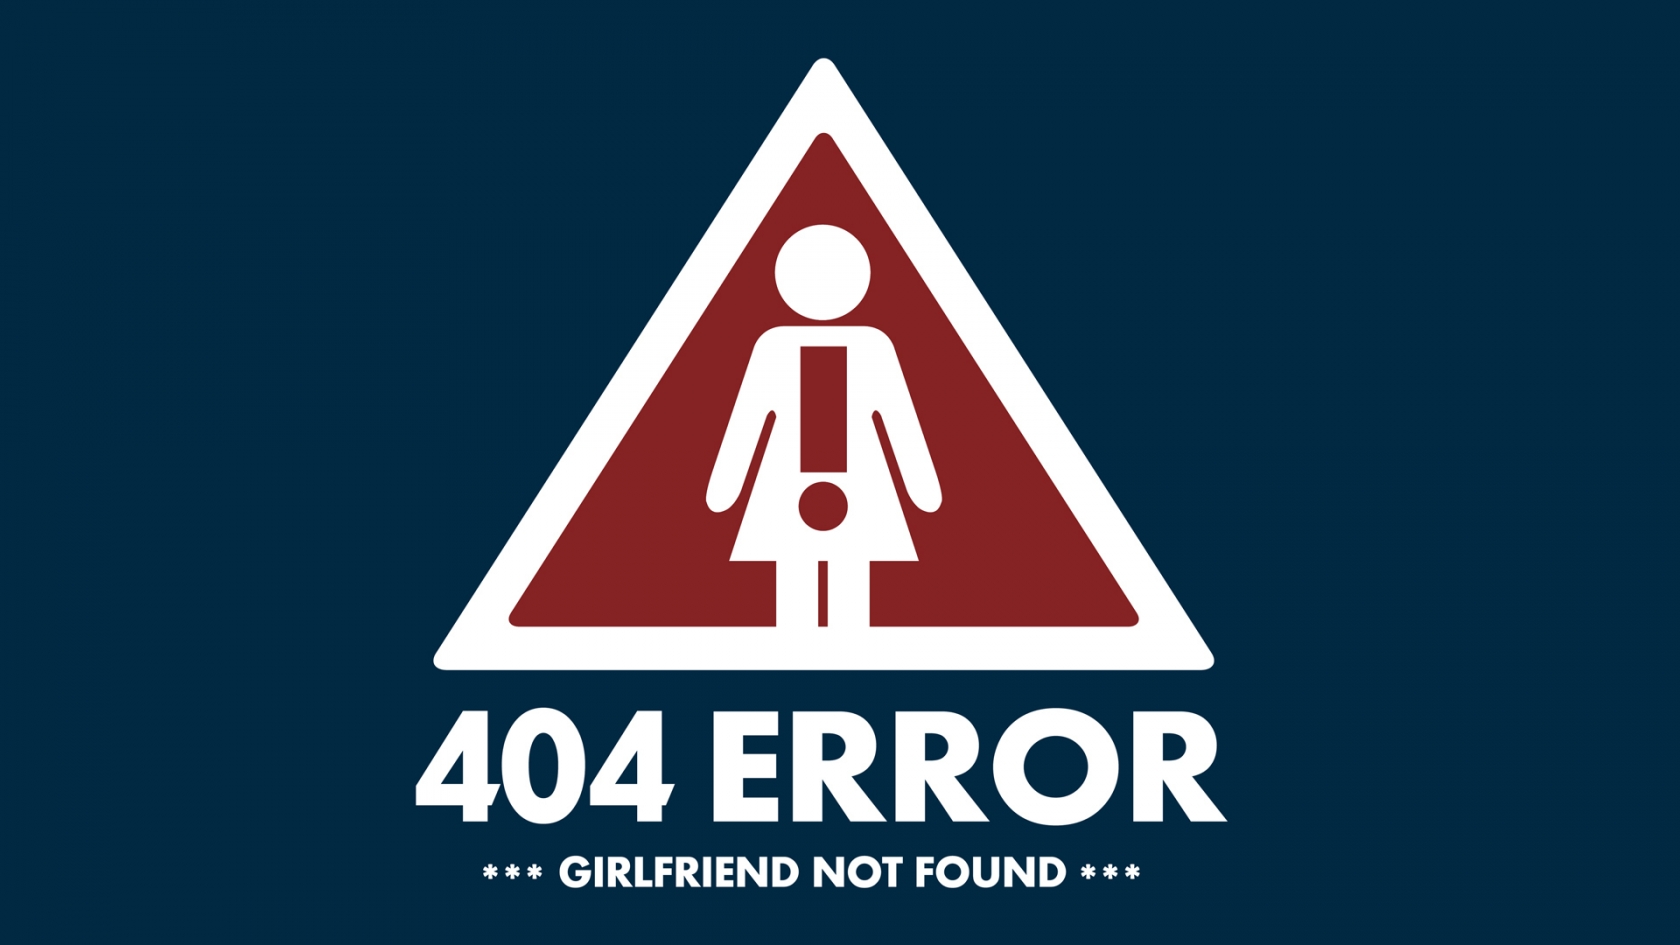 404 Error Page for 1680 x 945 HDTV resolution